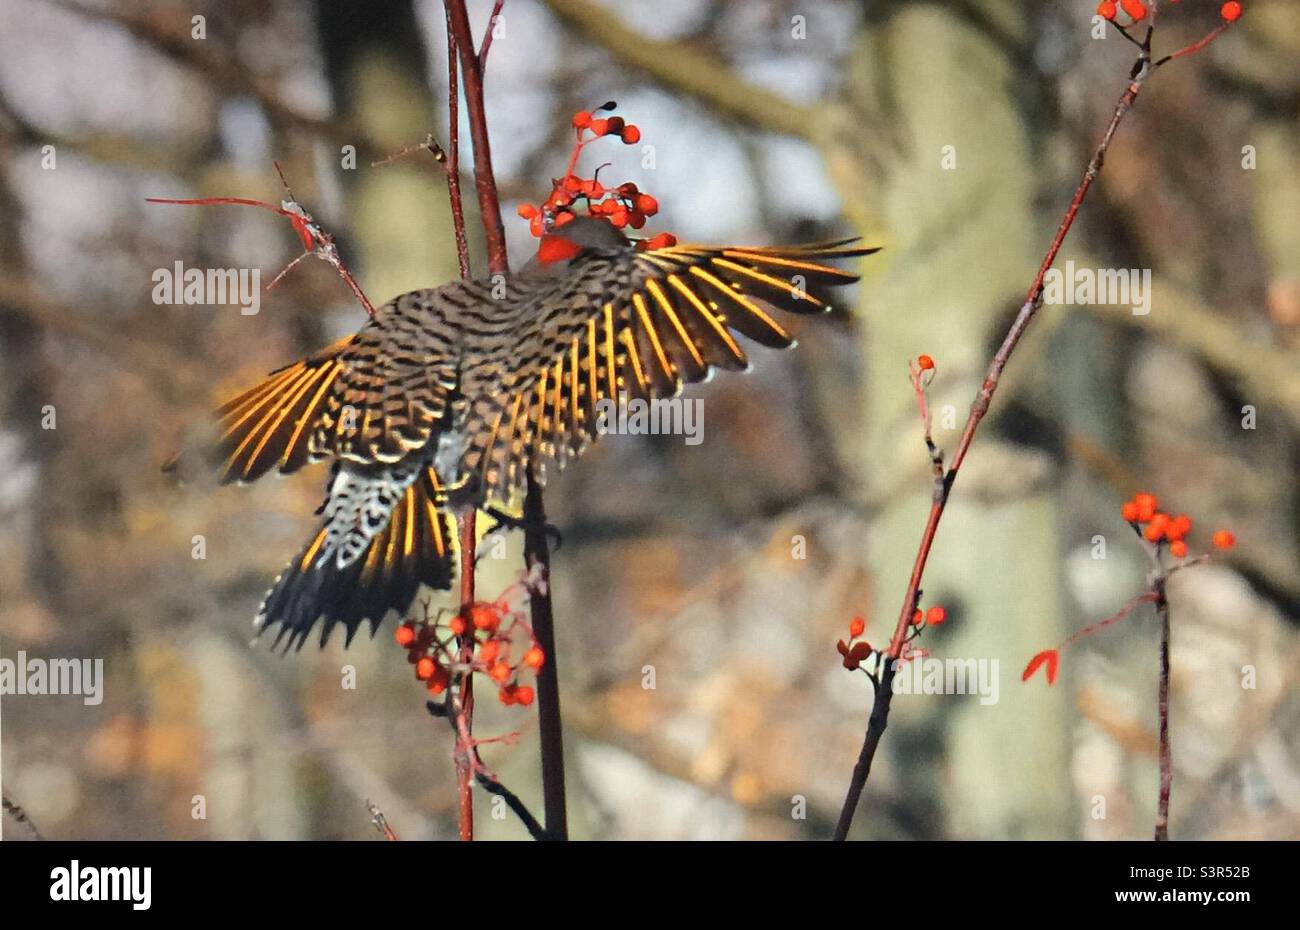 Yellow-shafted ,Northern Flicker, woodpecker, birds of North America, wildlife, backyard photography, mountain ash, berries Stock Photo